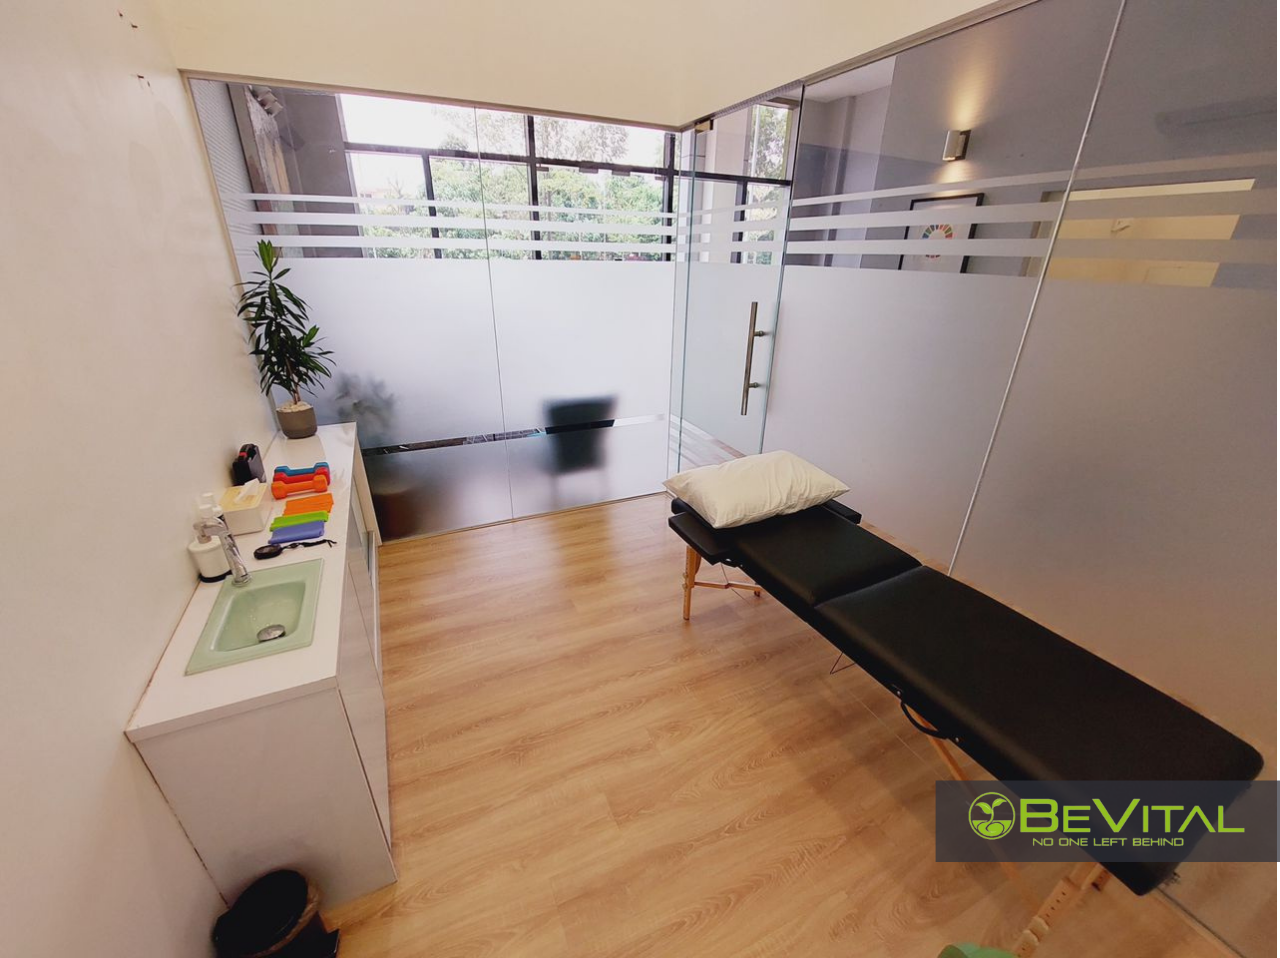 BeVital Physiotherapy Centre